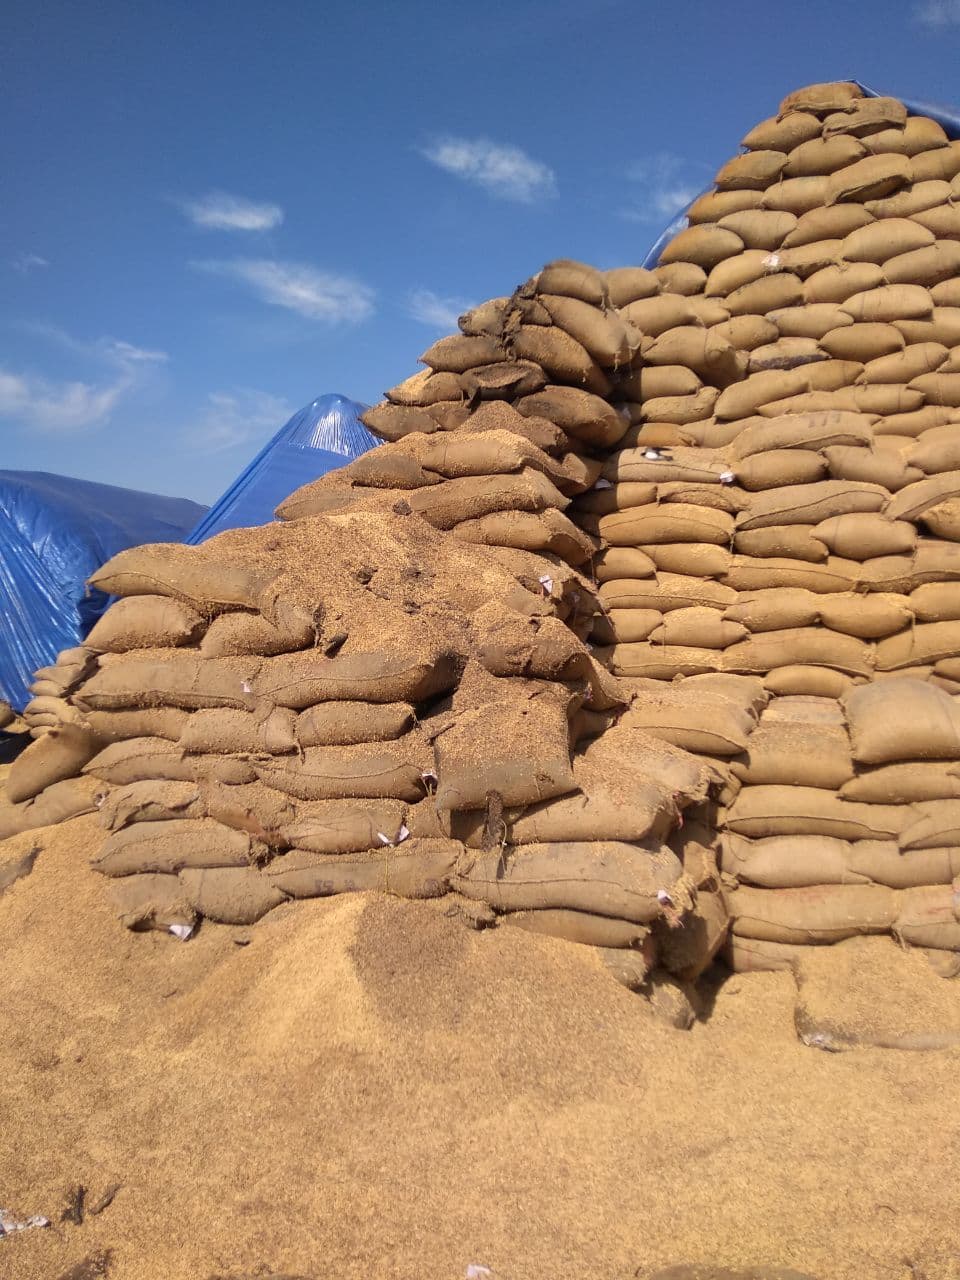 Thousands of quintals of paddy stored in open cap got spoiled, paddy l